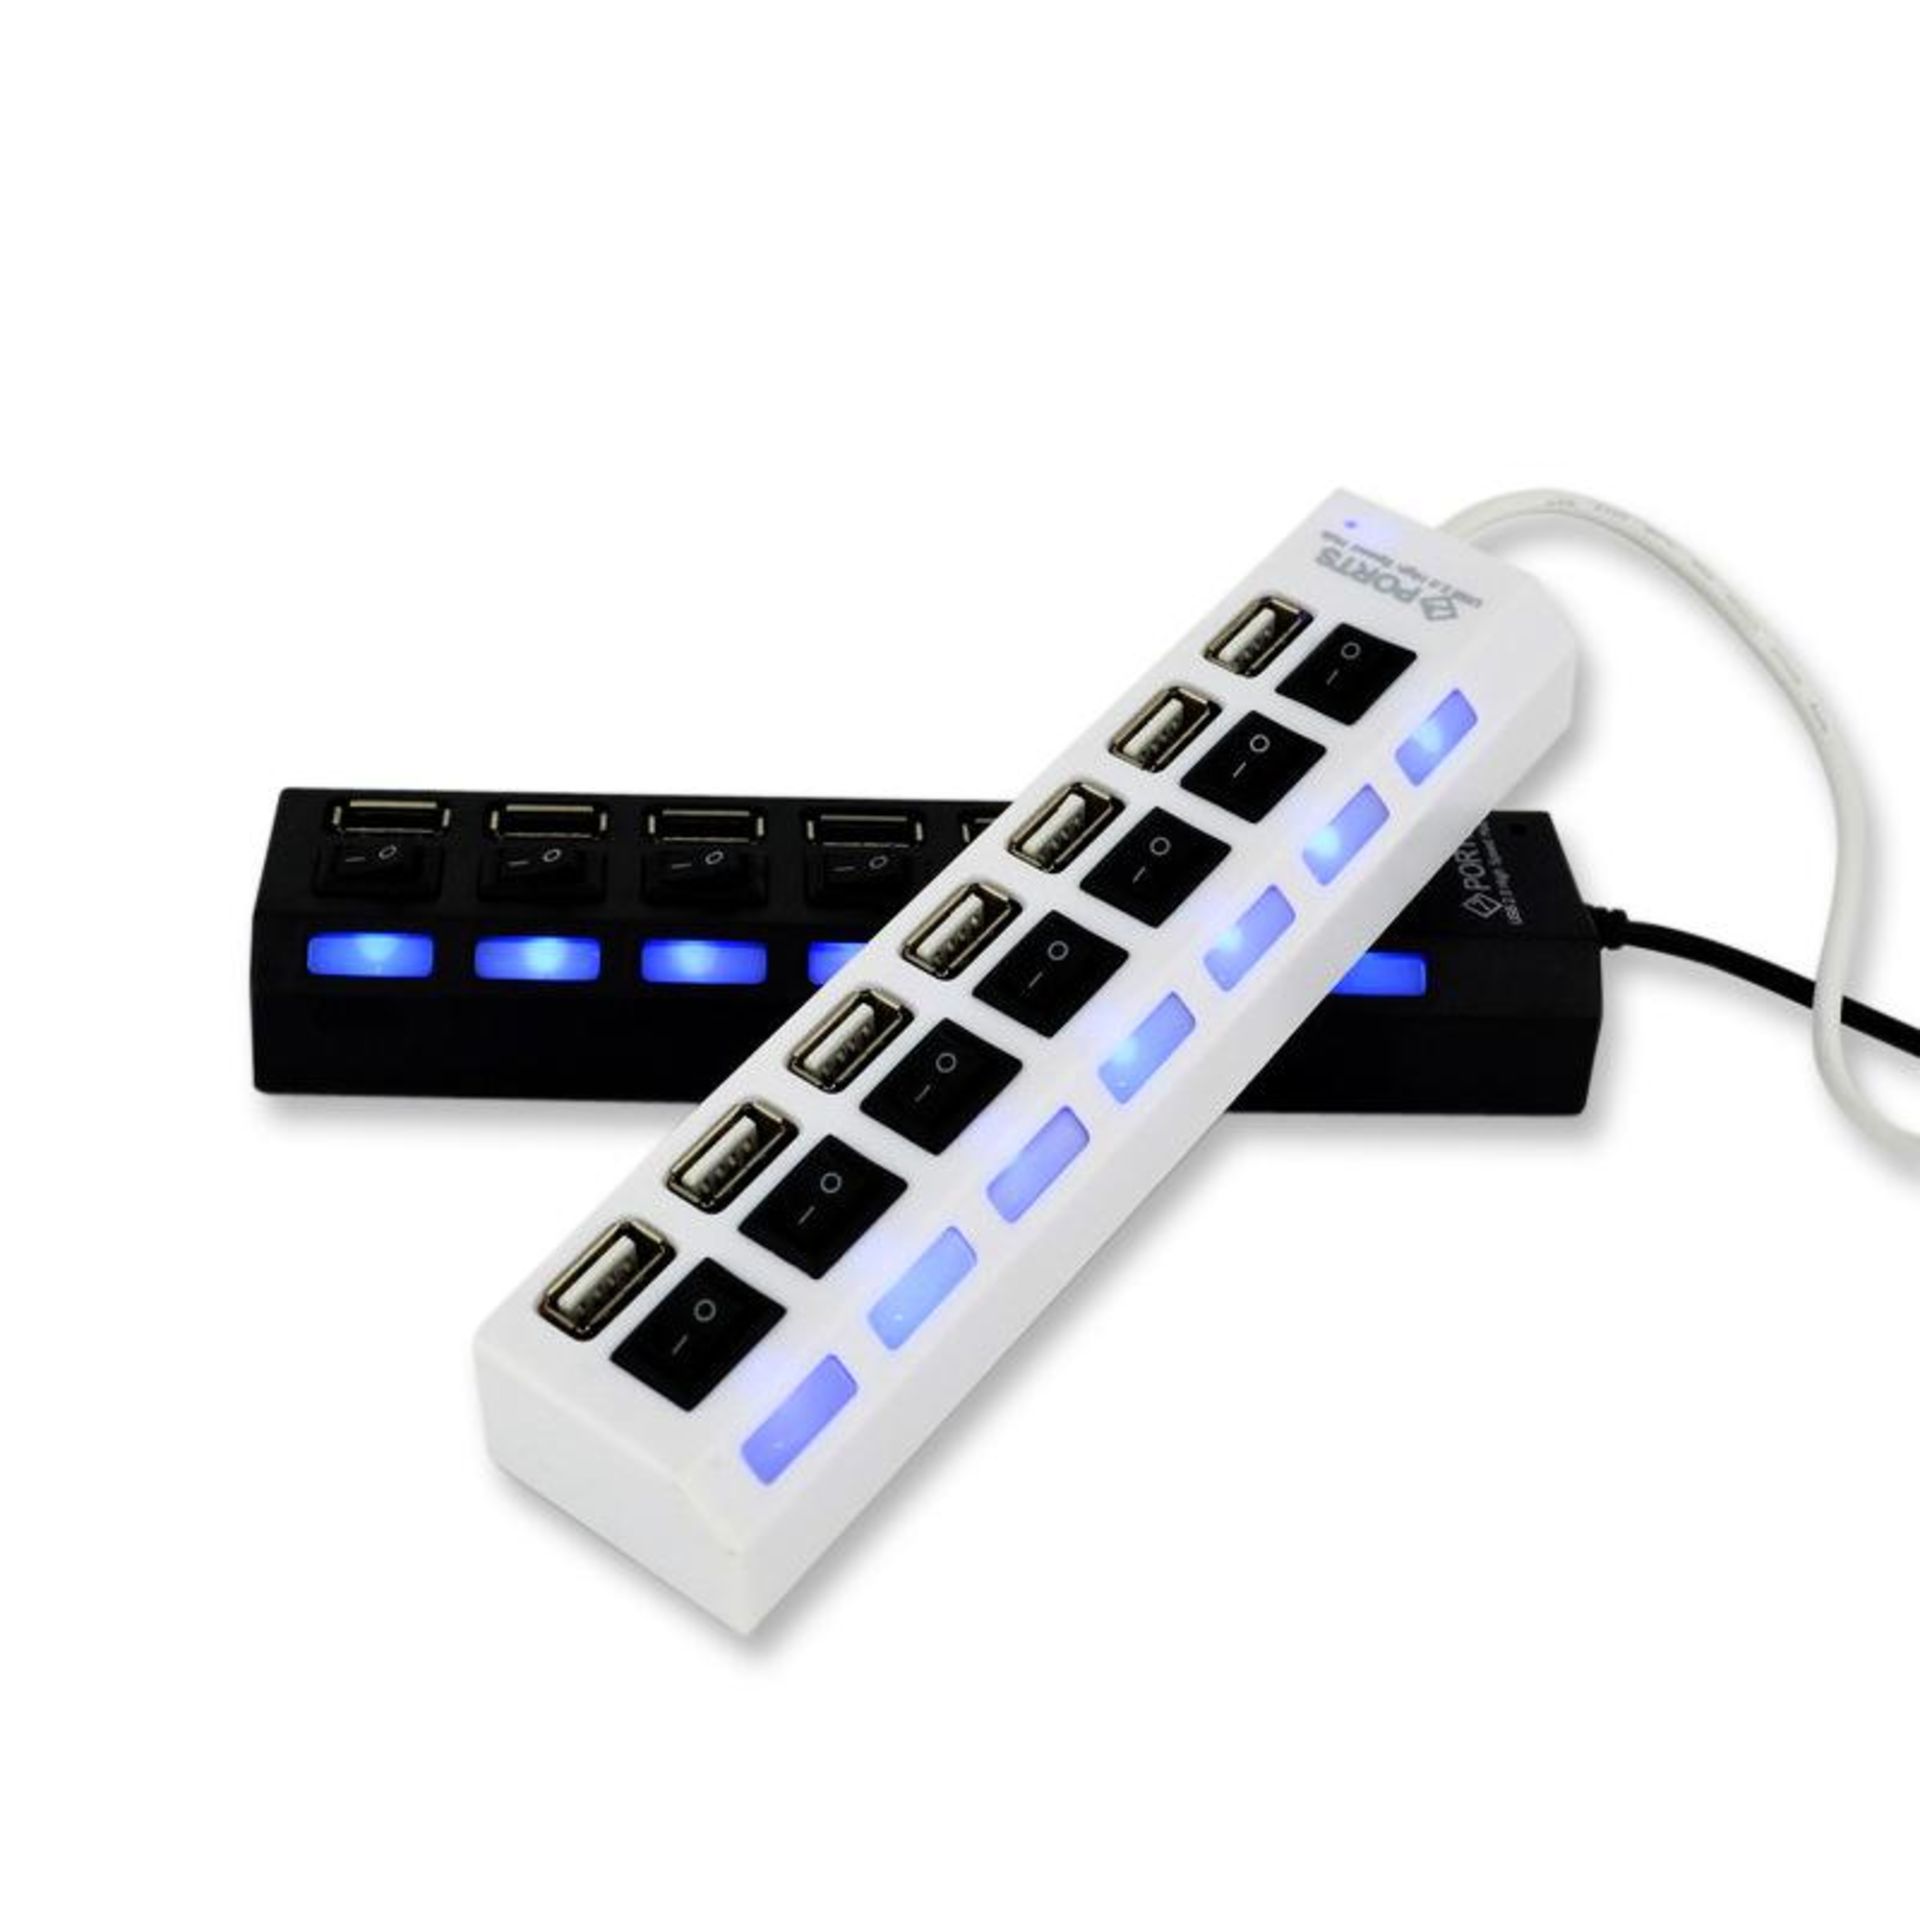 *TRADE QTY* Brand New 7 Port USB High Speed Hub - On/Off Switch on Each Port - With Blue LED